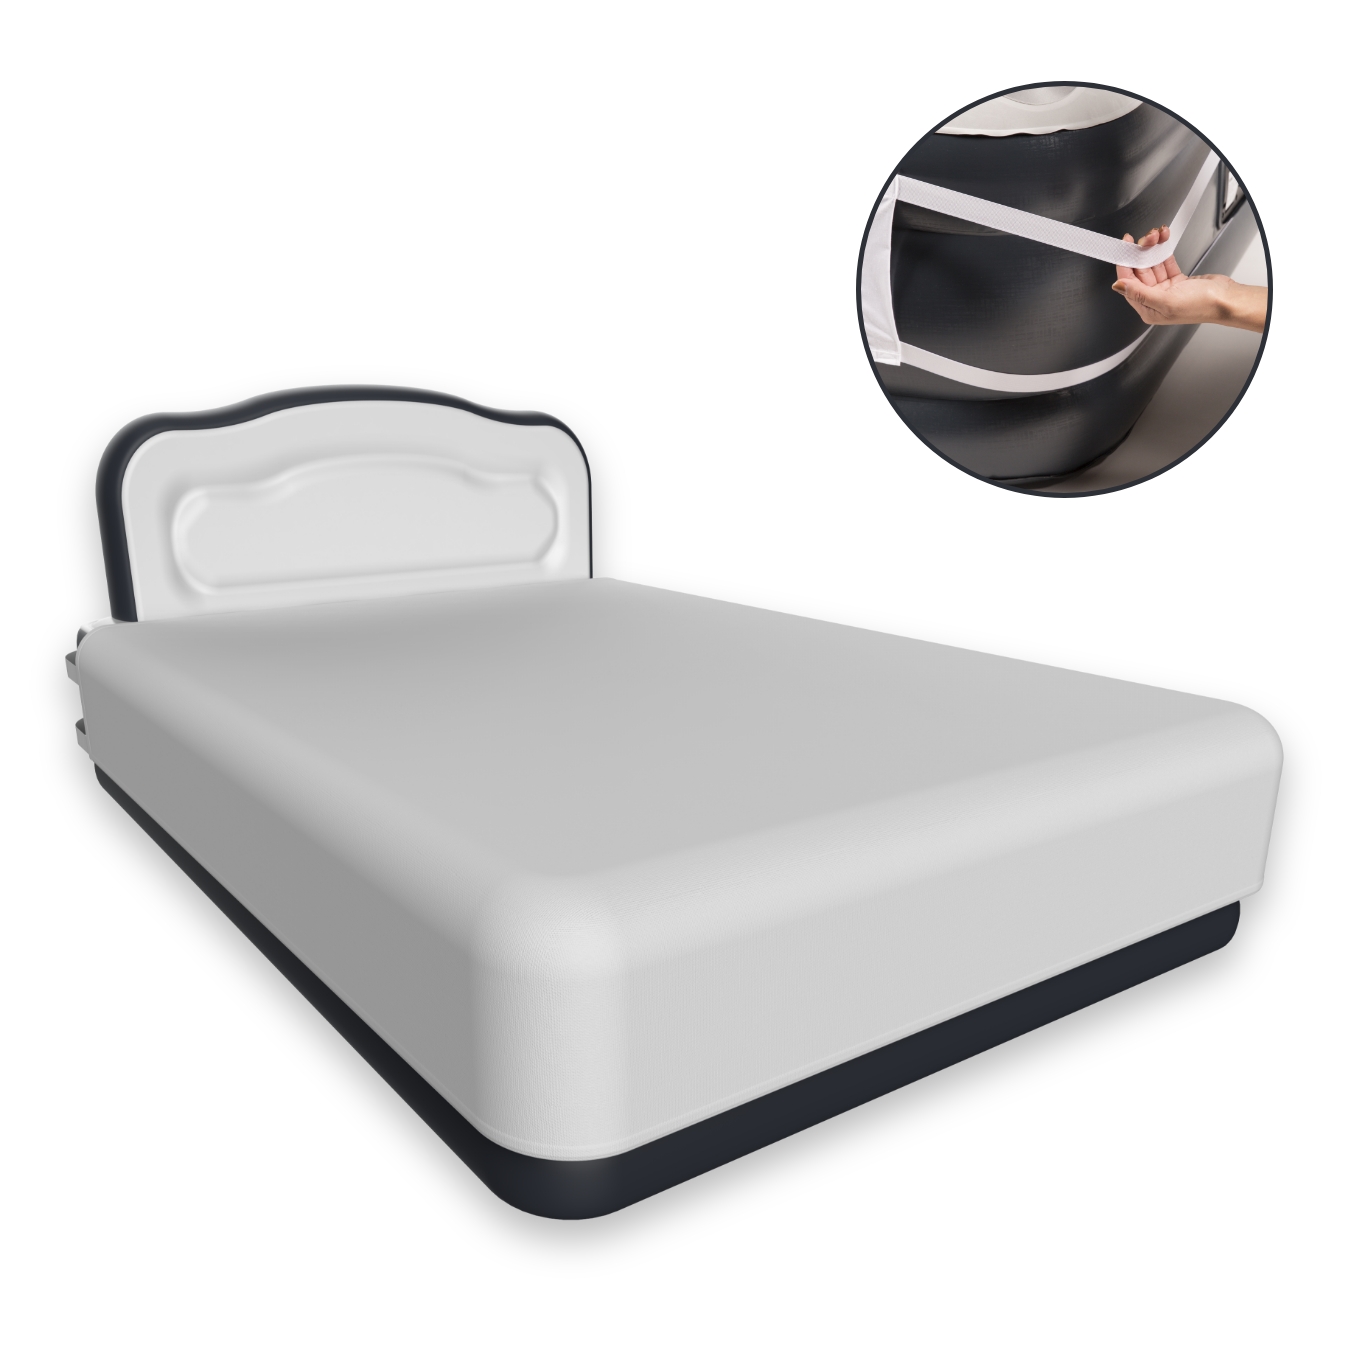 View YAWN Air Bed DELUXE with Custom Fitted Sheet King information